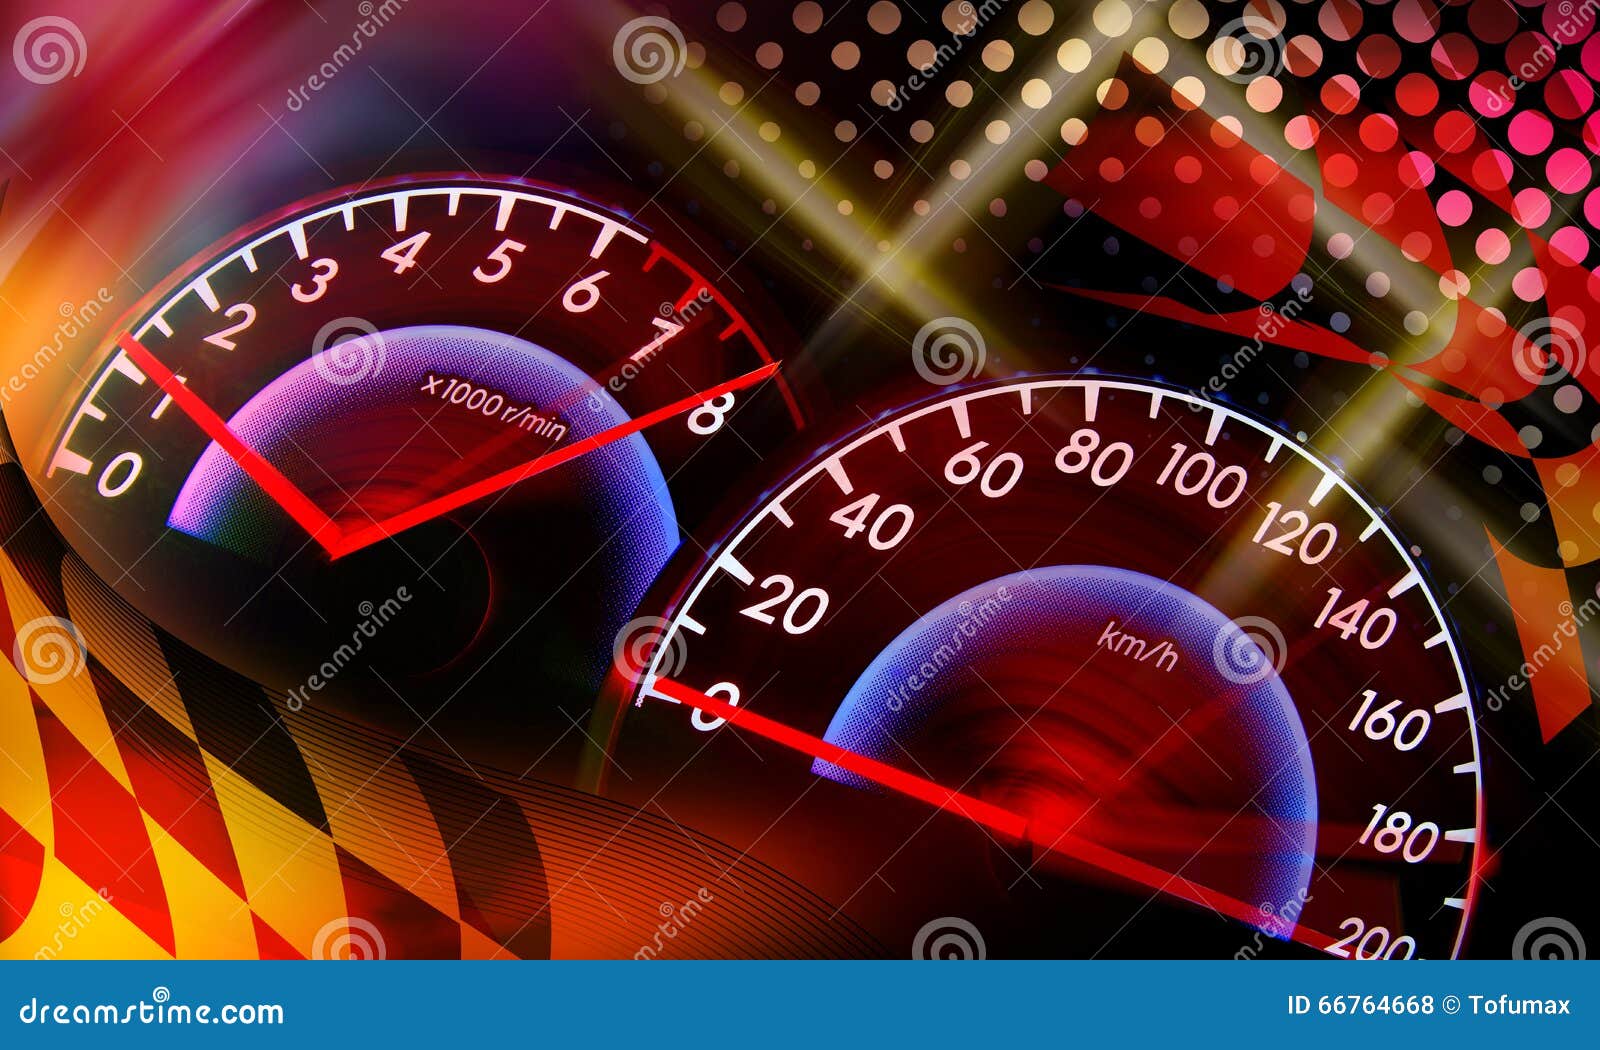 AOFOTO 6x4ft Speedometer Racing Chequered Flag Background Motorcycle Race Photography Backdrop Speed Automobile Formula One Motor Car Auto Motorsport Champion Sport Competition Studio Props Wallpaper